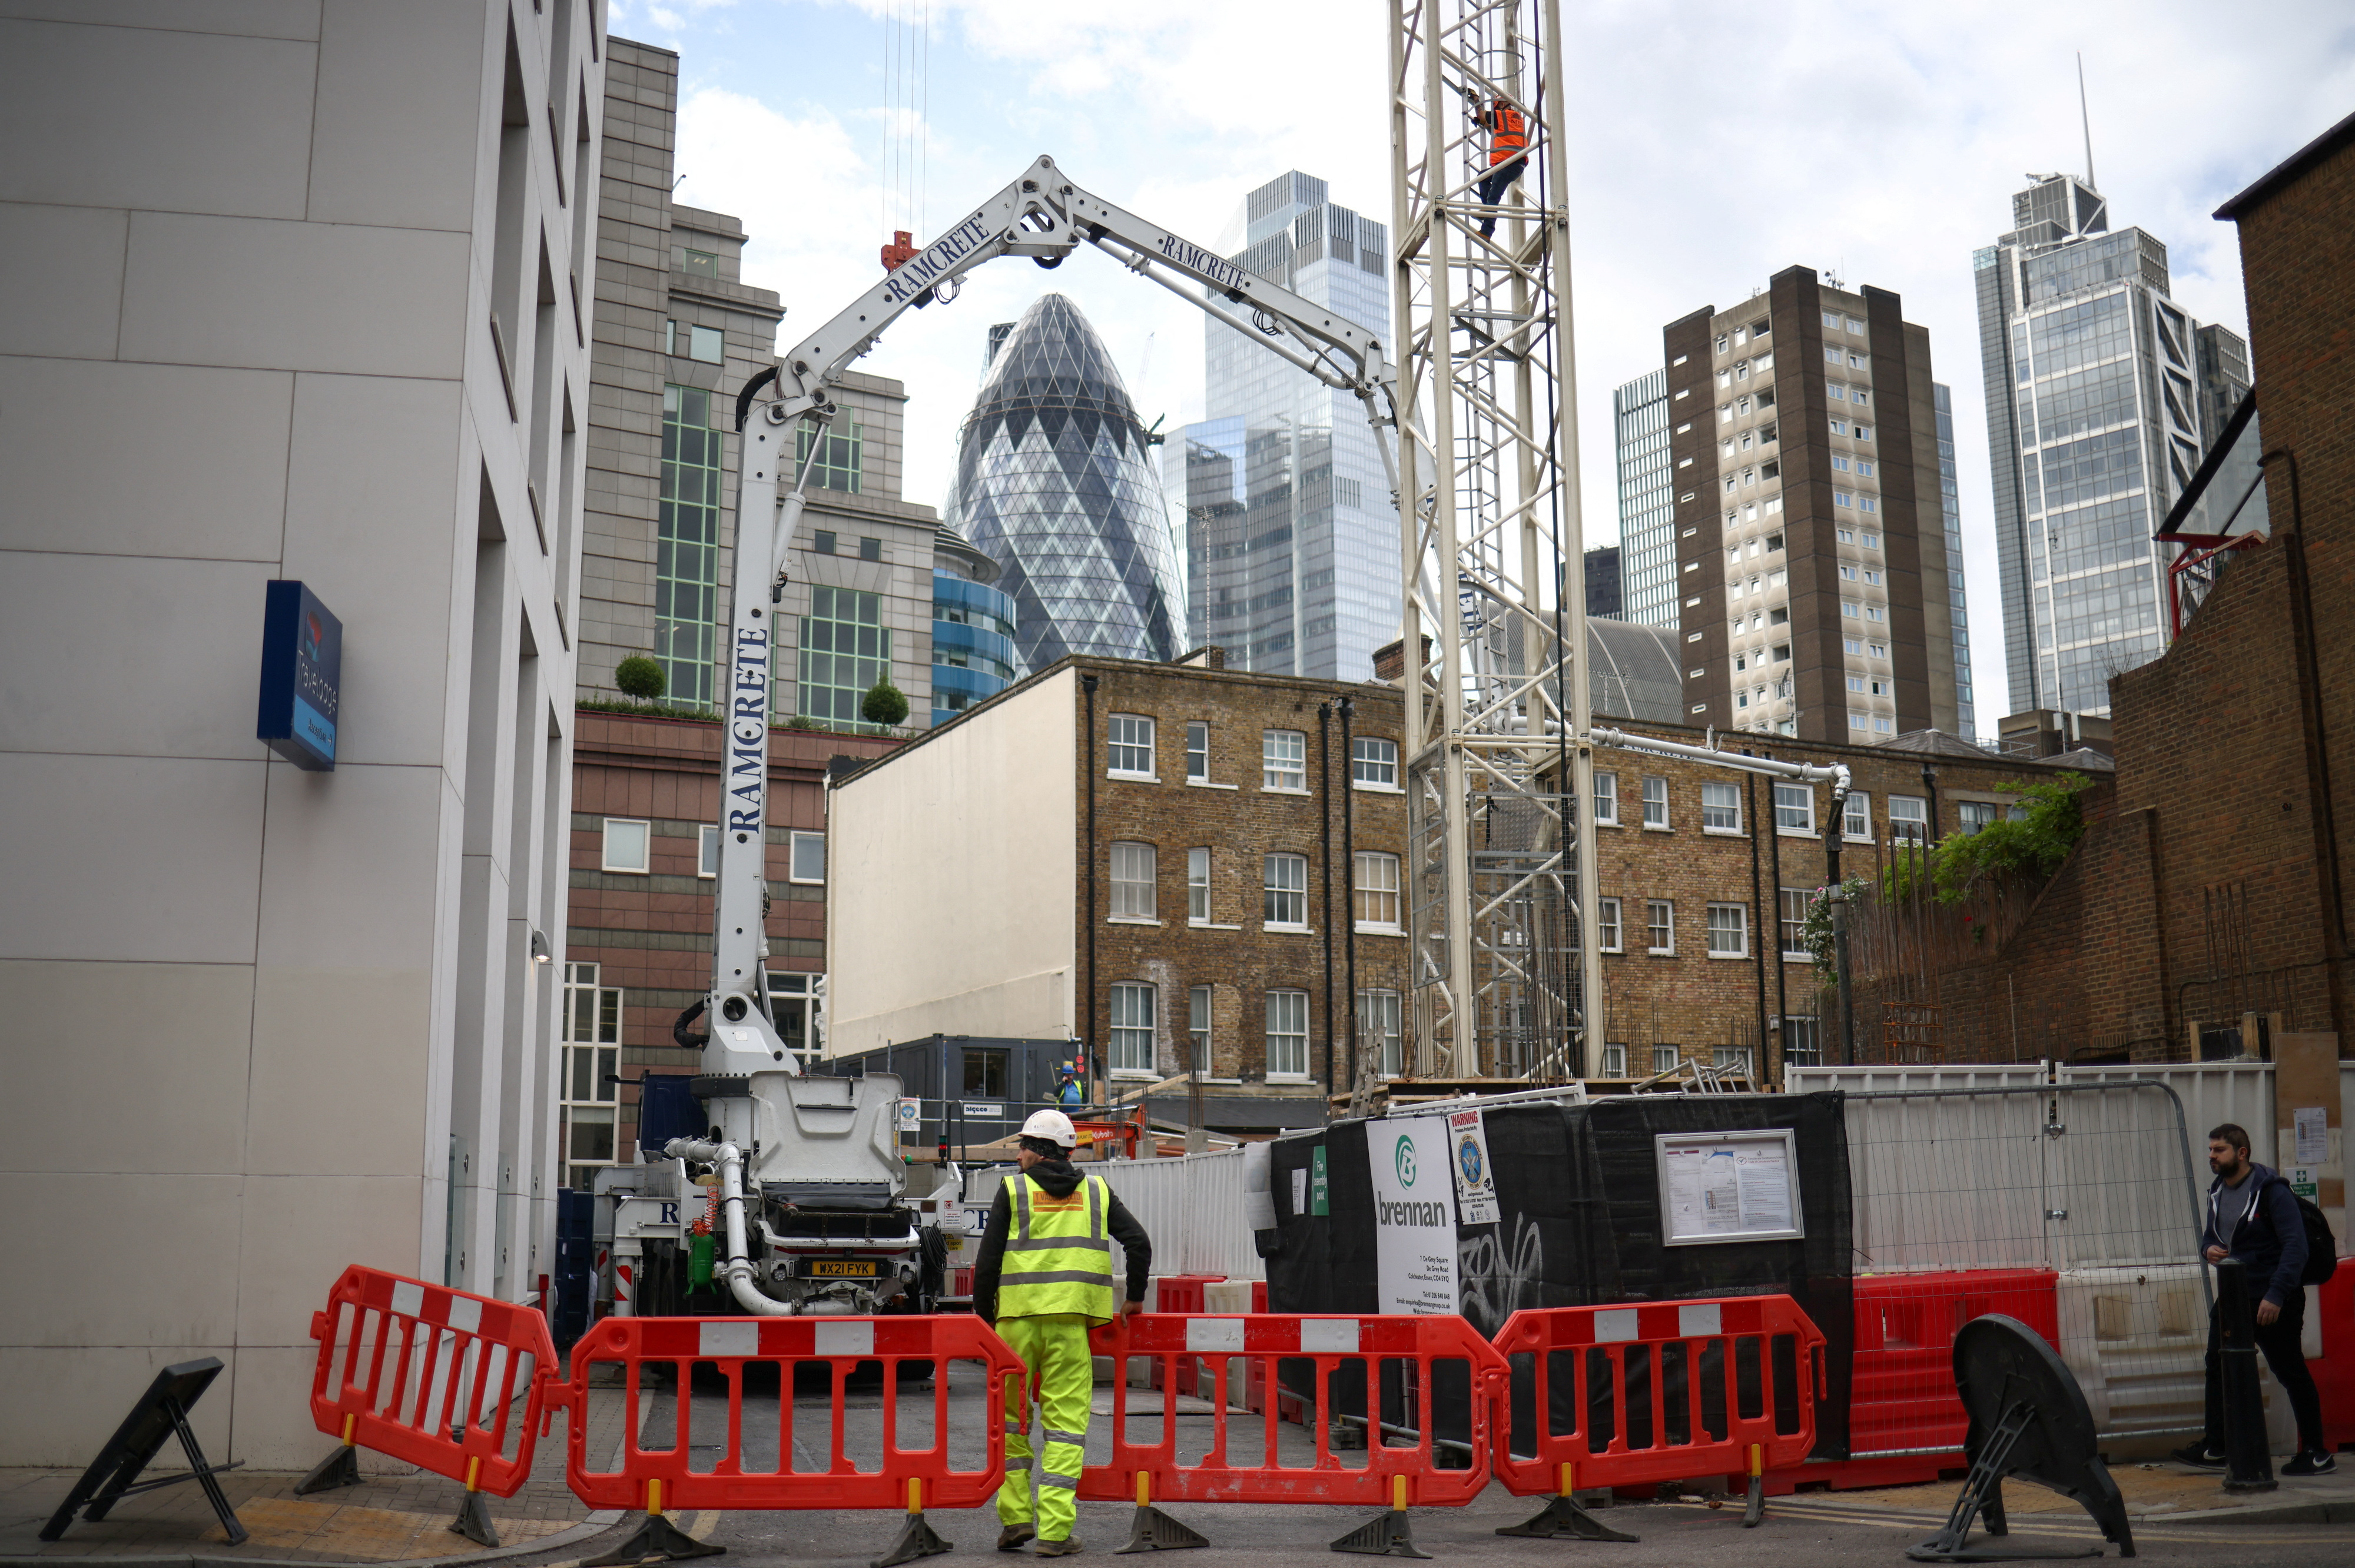 A construction worker moves barriers at a construction site, with the City of London financial district seen behind